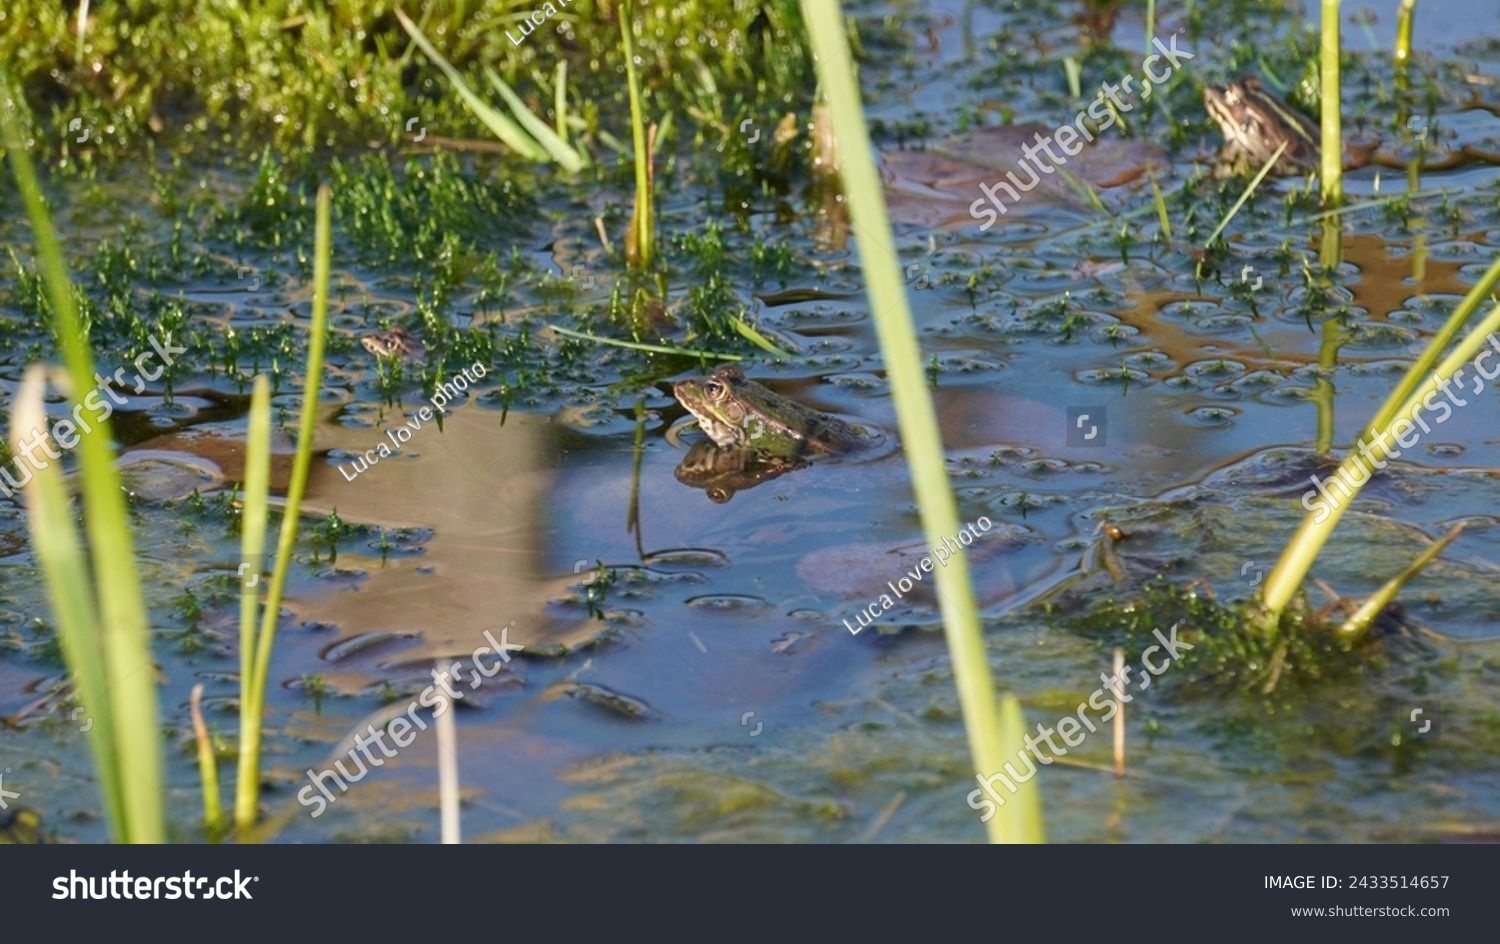 Pelophylax ridibundus, Regulating the temperature in the sun and oxygenating. The Marsh frog, at the pond. Late winter season  #2433514657